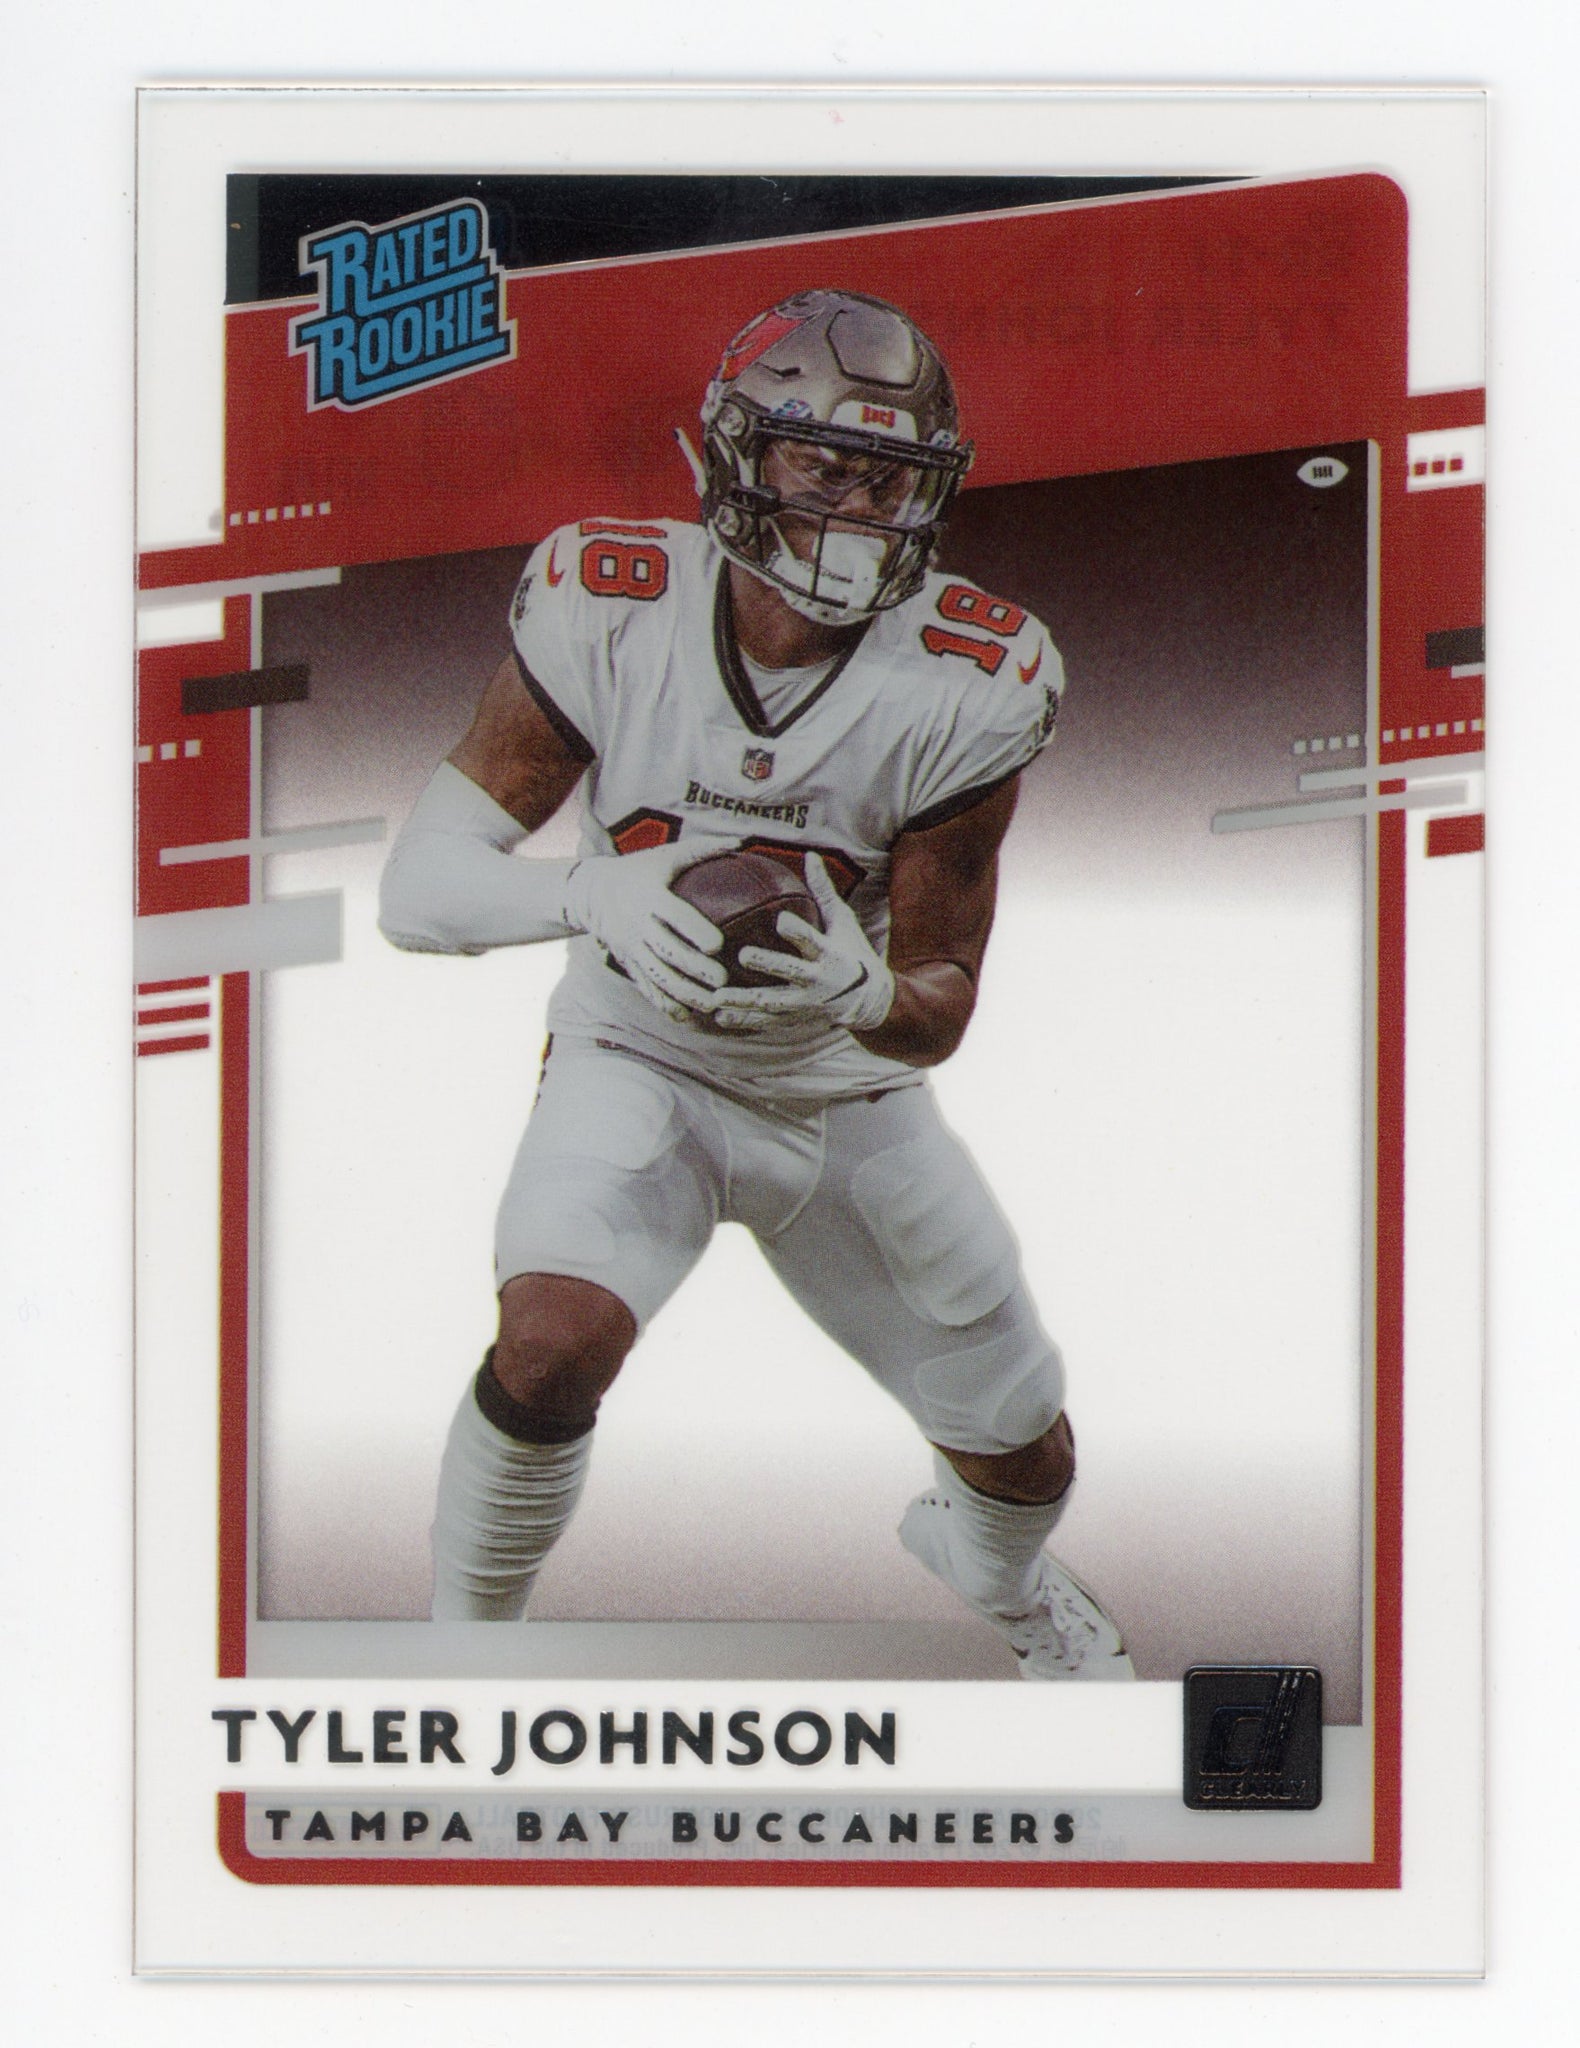 Tyler Johnson Panini 2020 Rated Rookie Clearly Tampa Bay Buccaneers RR-TJ